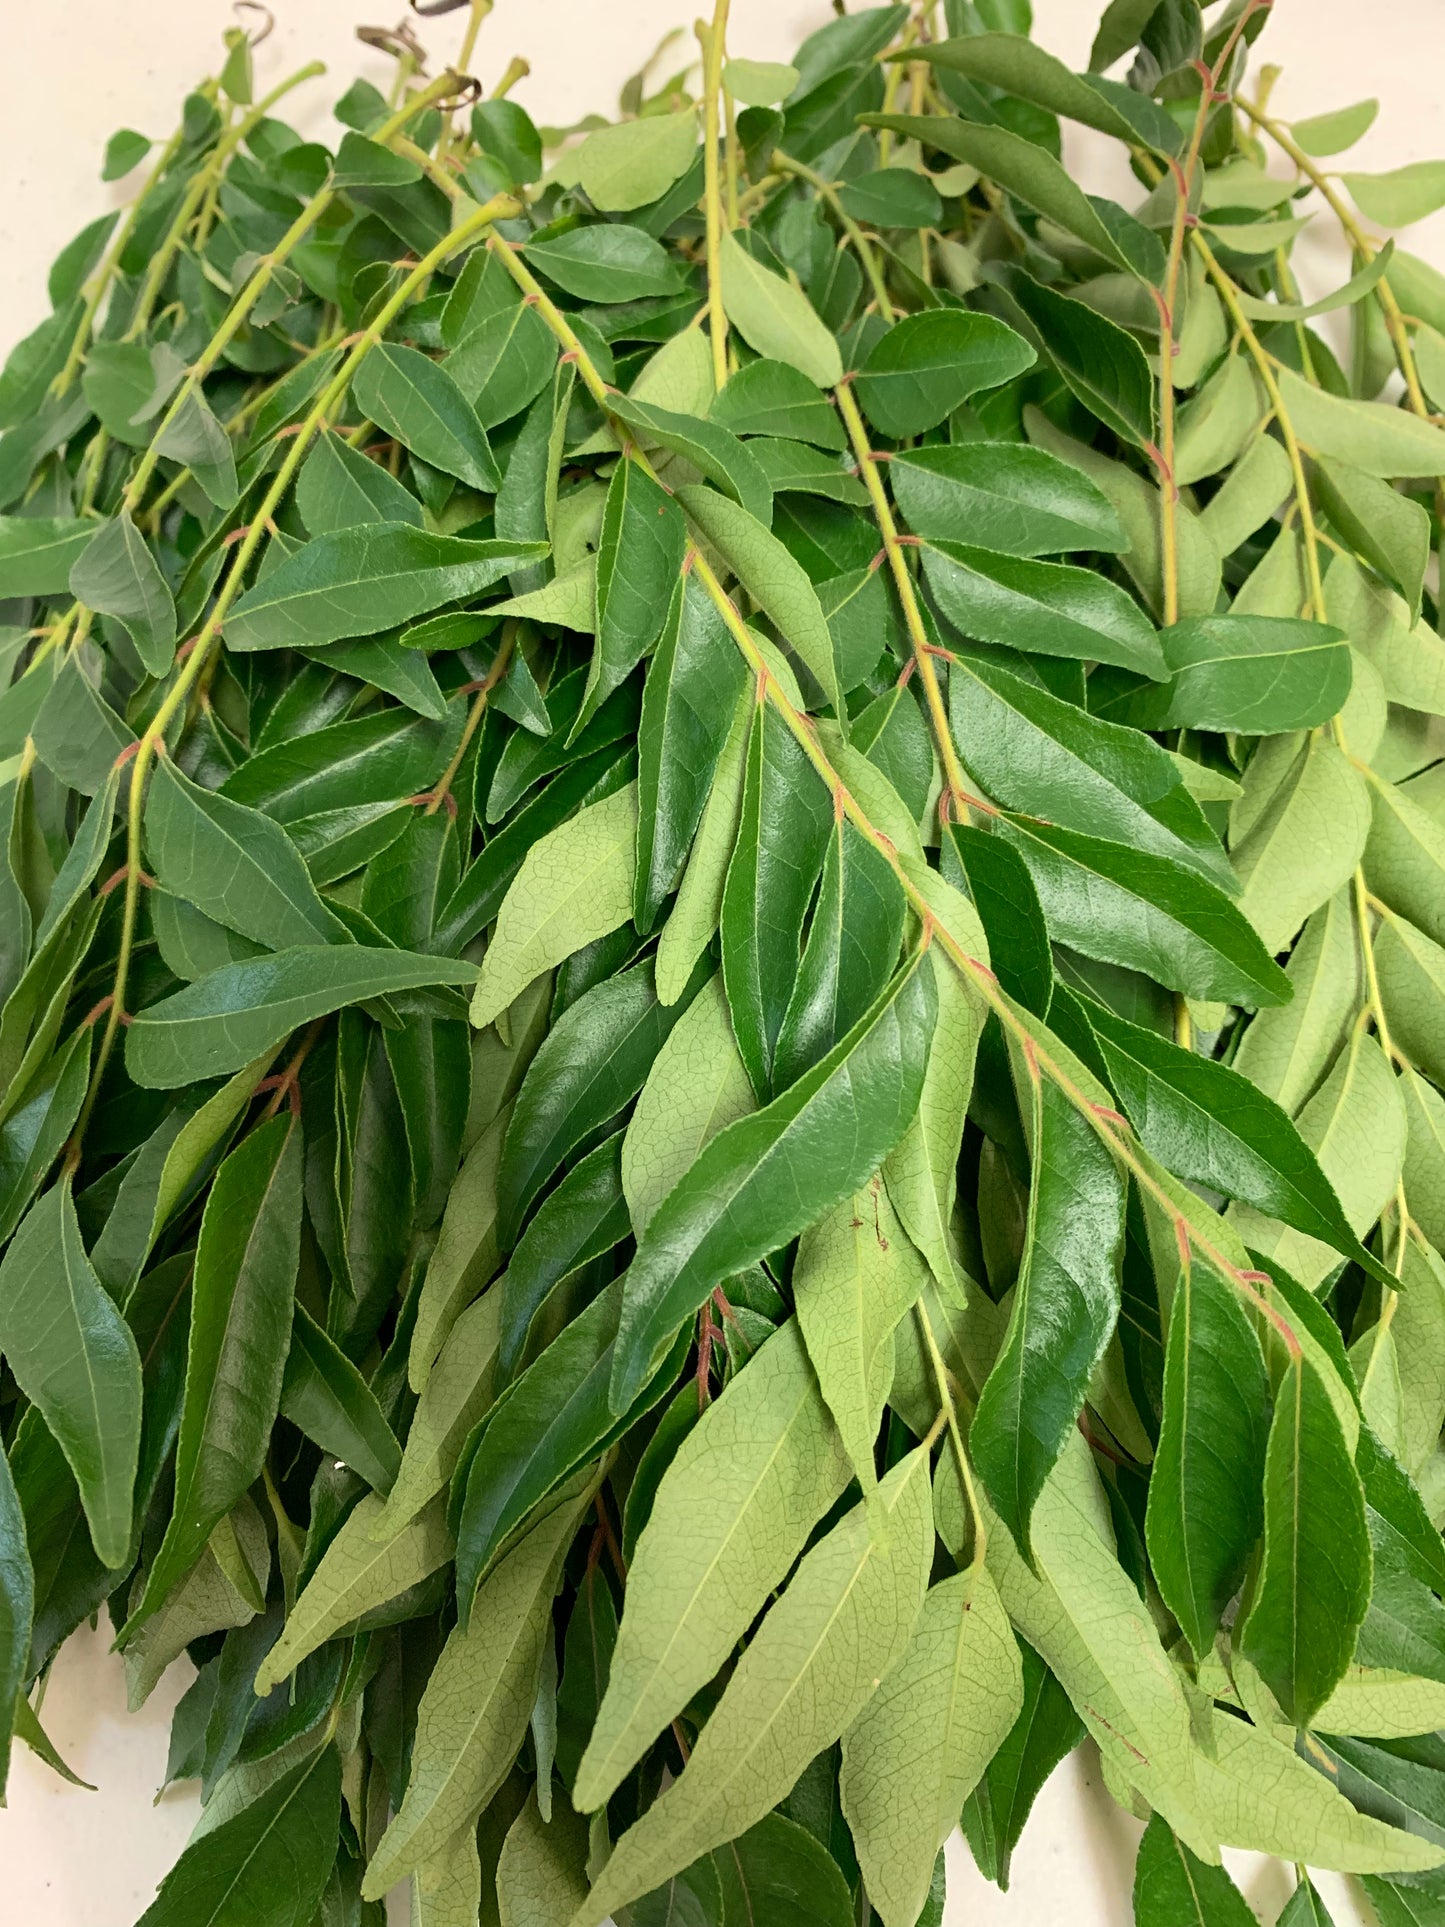 Fresh Curry Leaves - Ambali Fashion Groceries bohemian, classic, curry, eastern, ethnic, grocery, gypsy, indian, traditional